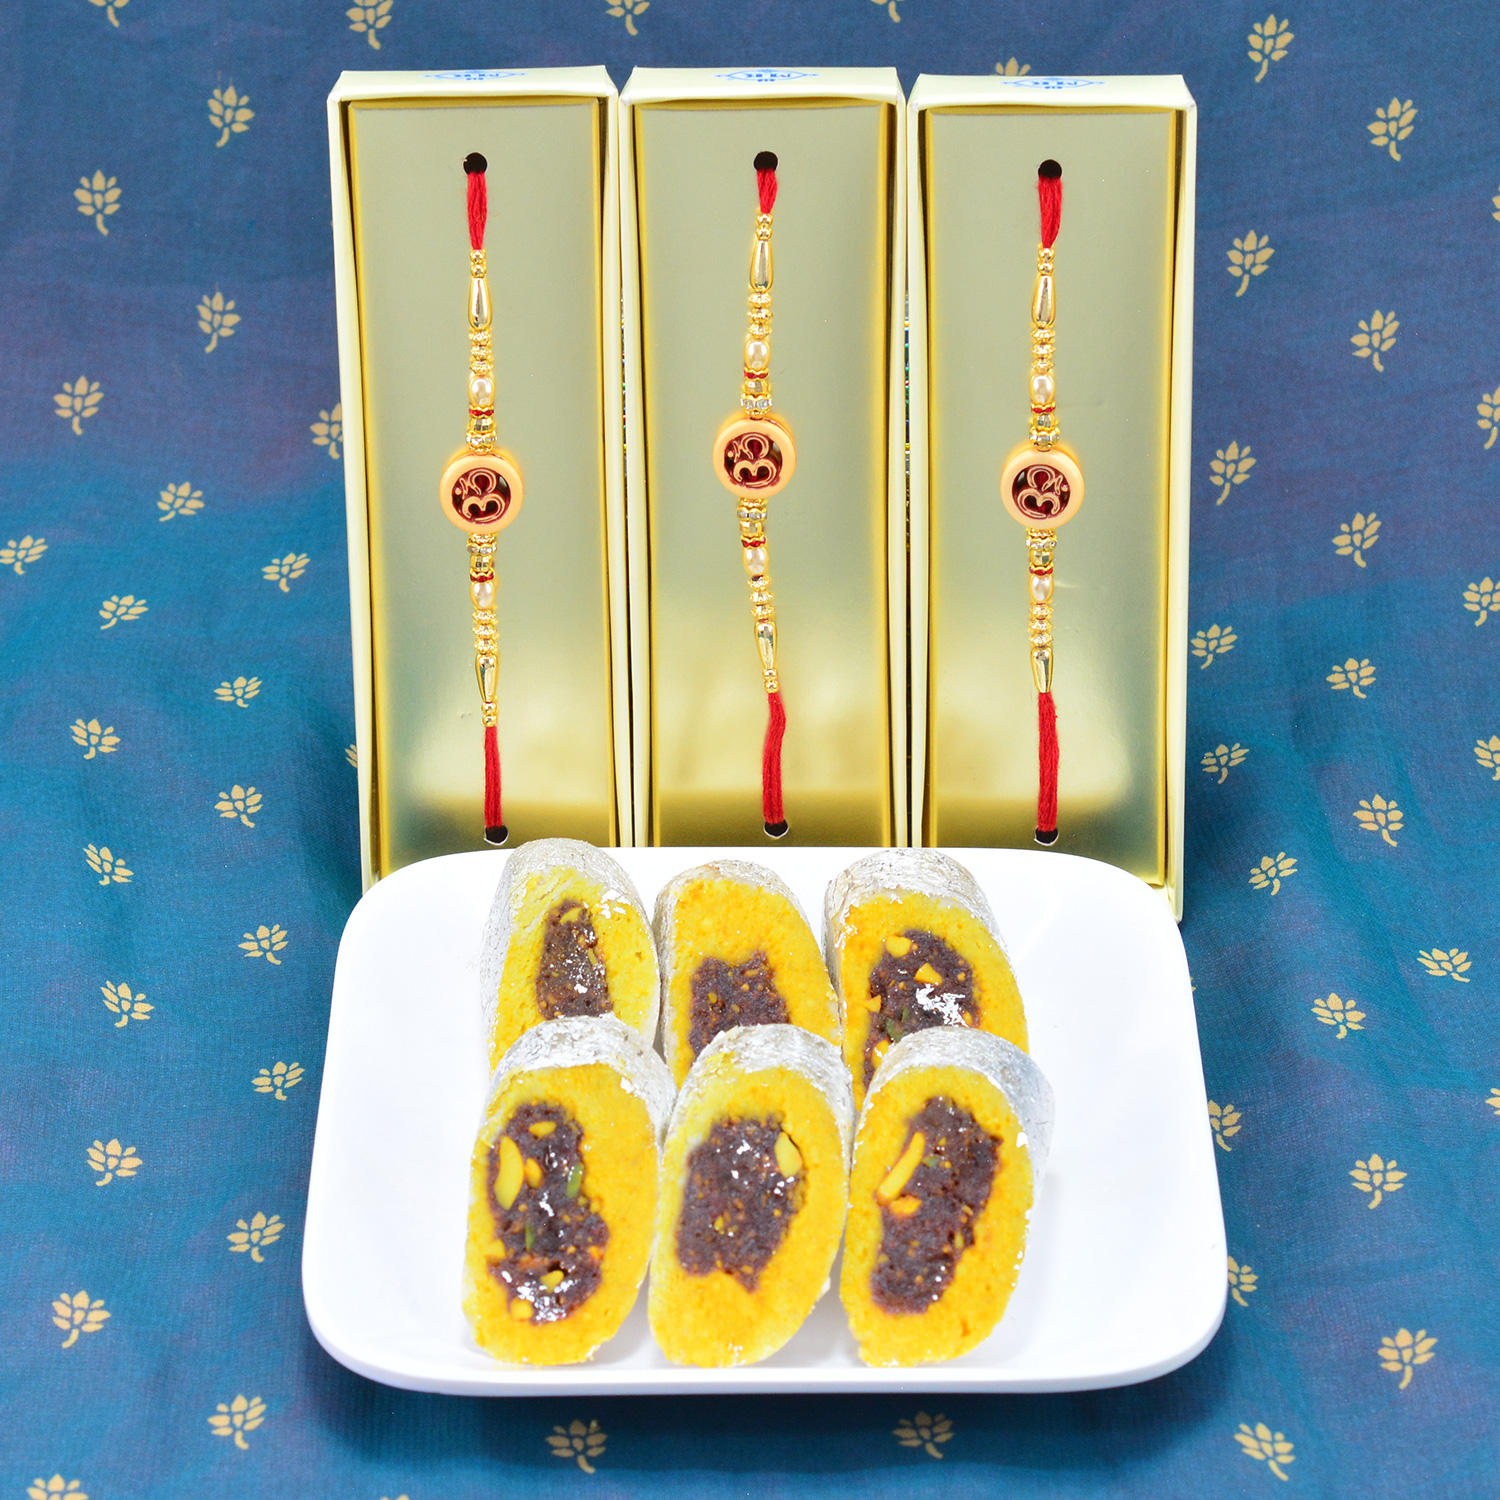 Rakhi with Sweets - 3 Divine Amazing Rakhis for Brothers with Mouth Watering Sweet of Kaju Raj Bahar